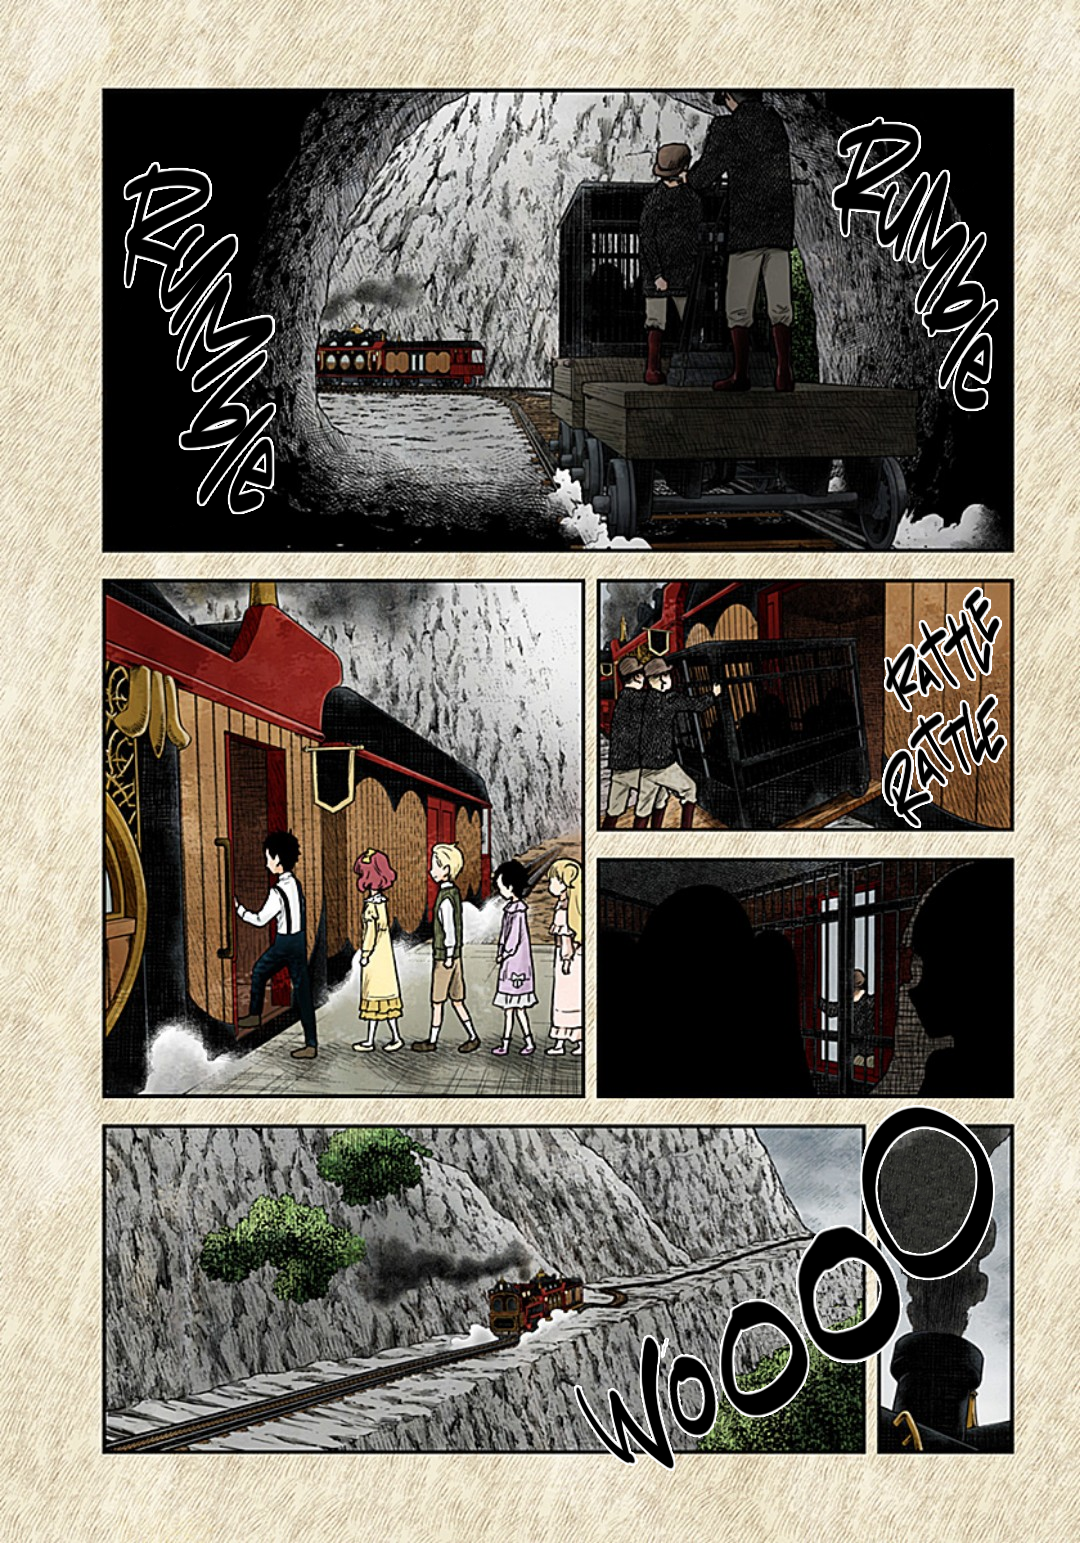 Shadows House - Page 2